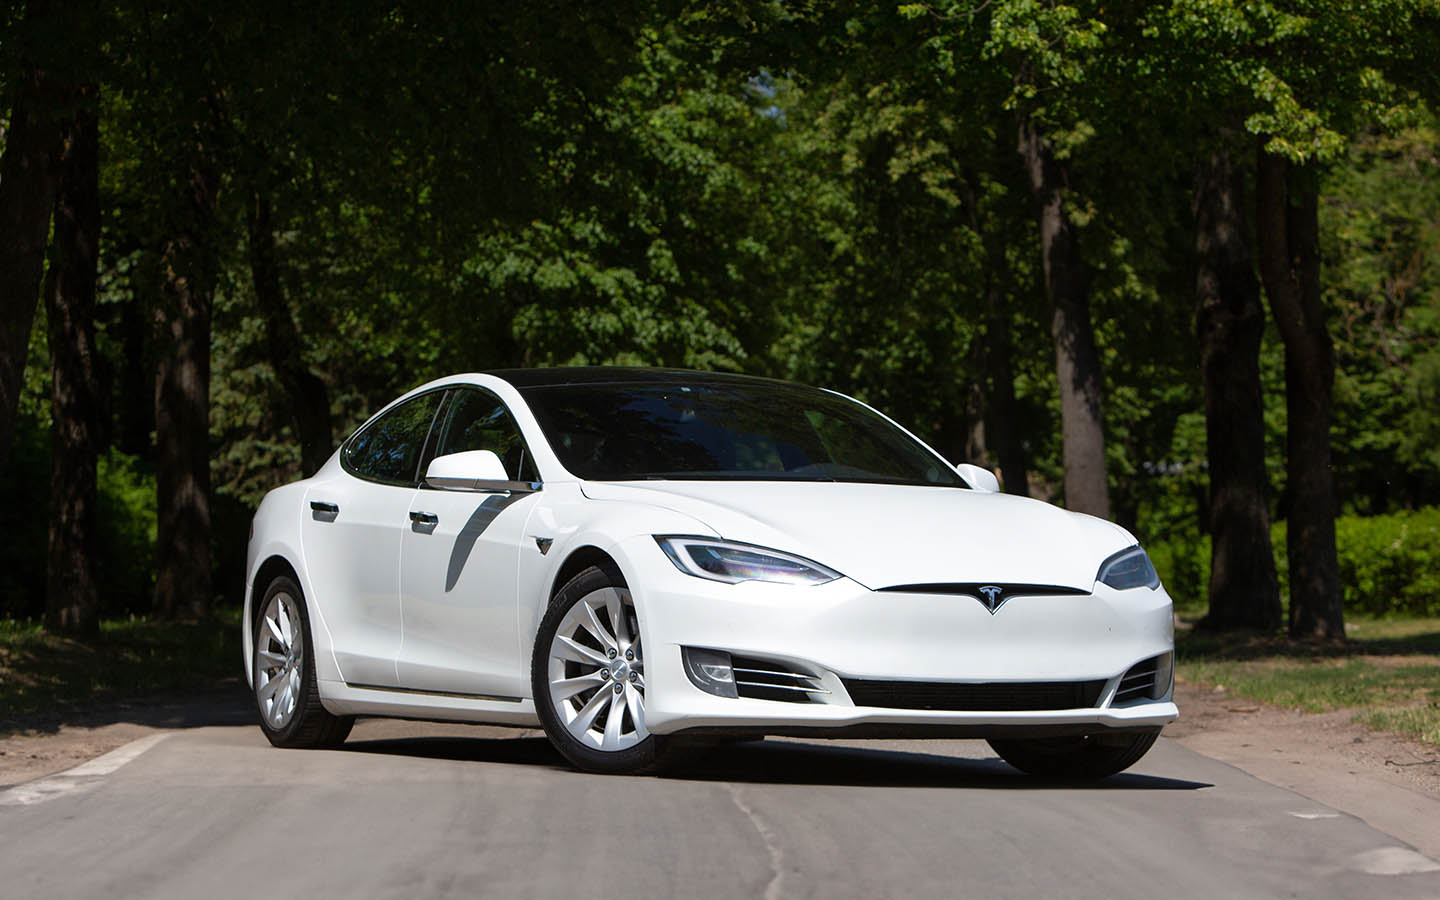 the Model S is one of Tesla's most iconic model